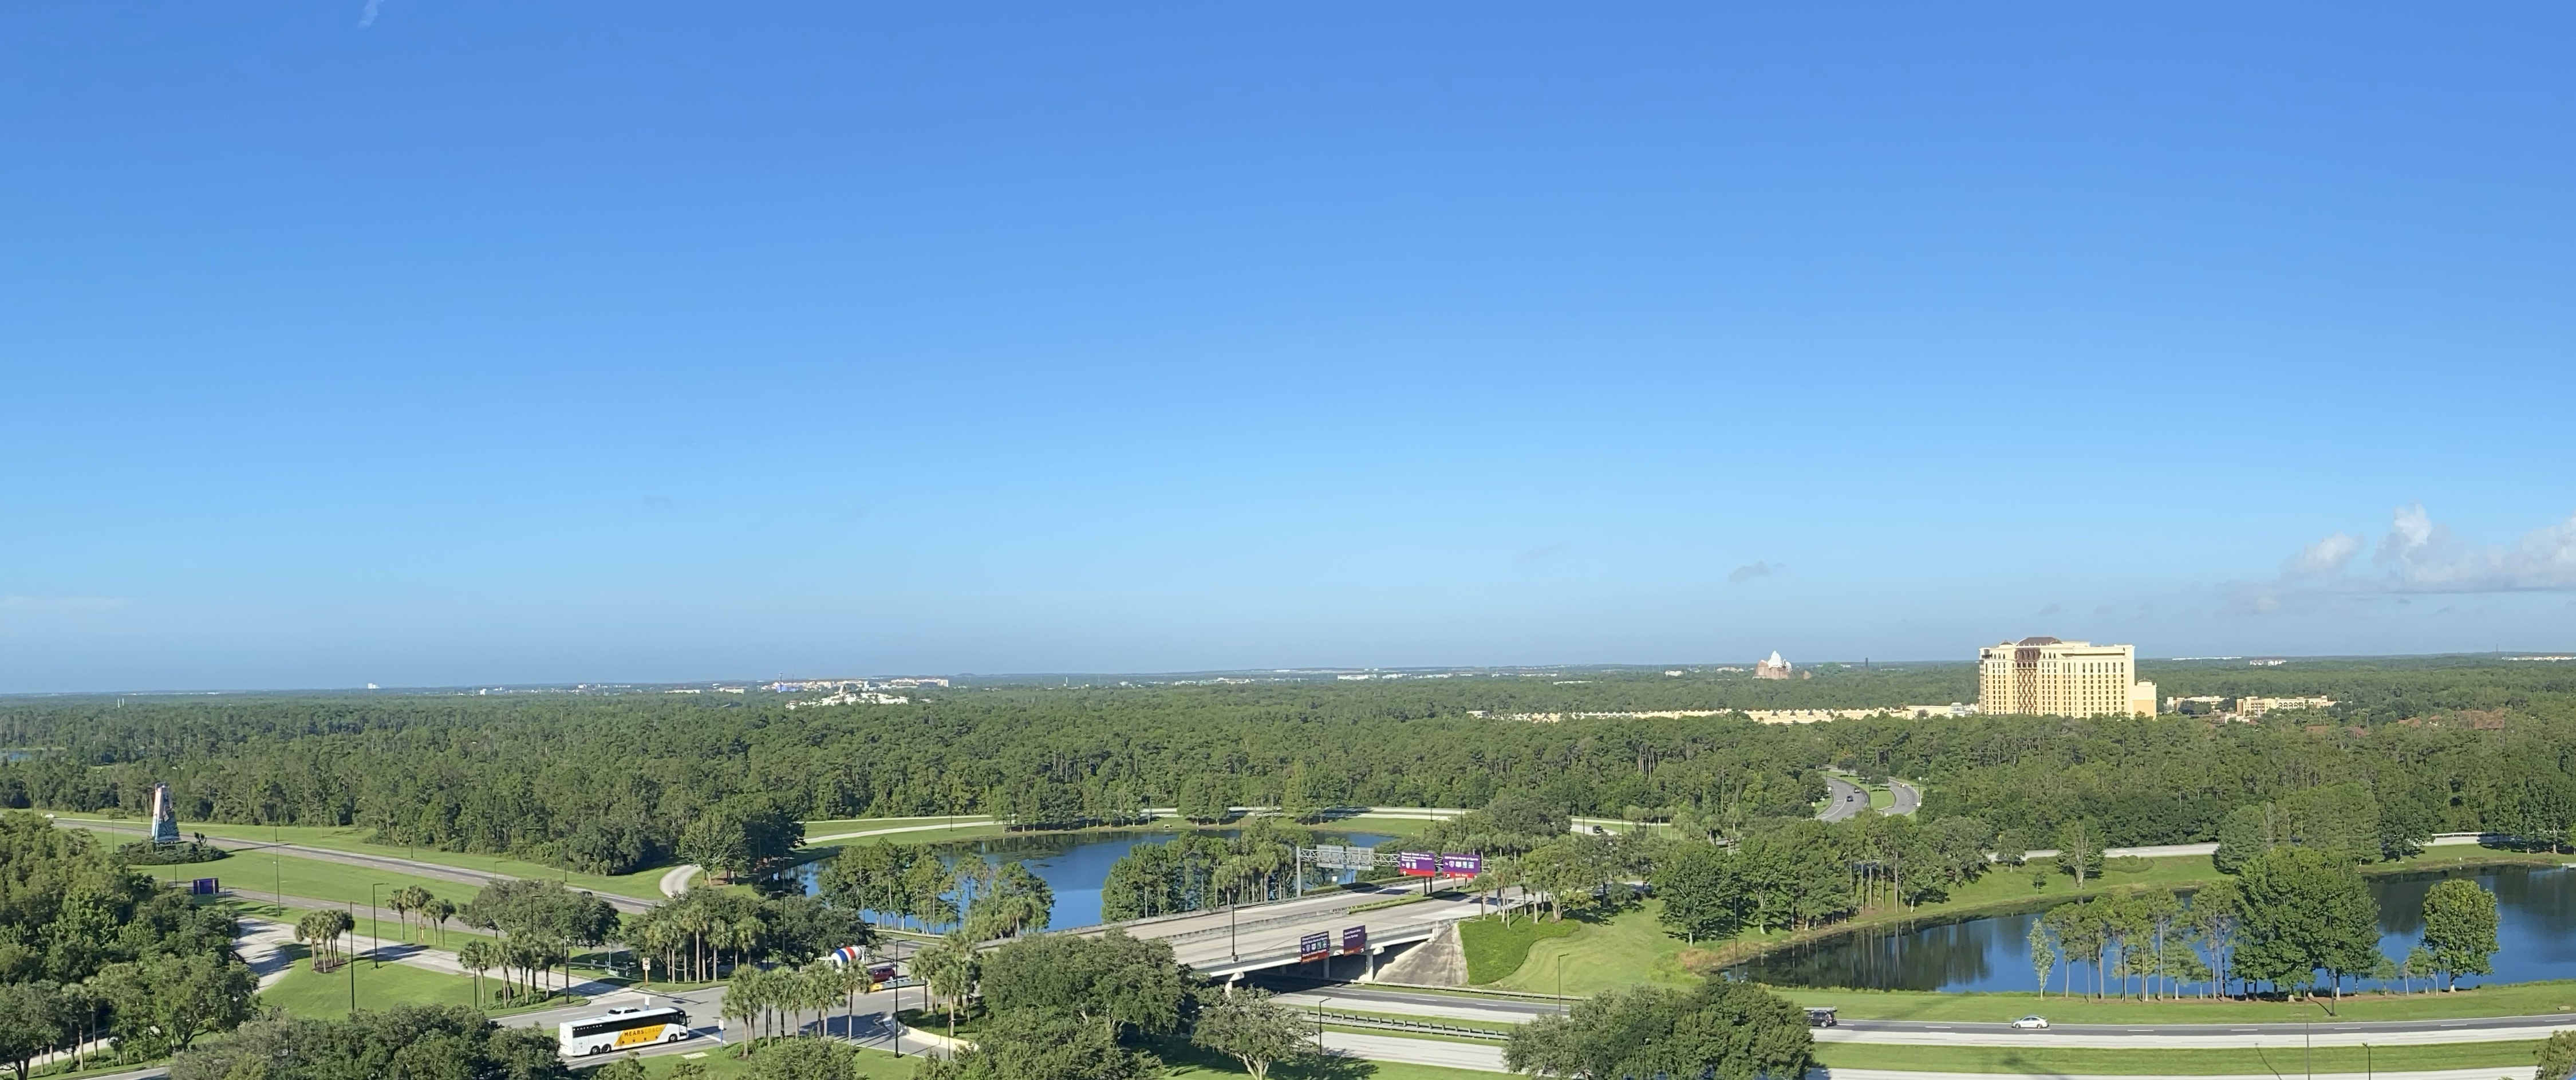 Views from the top of the Walt Disney World Swan Reserve